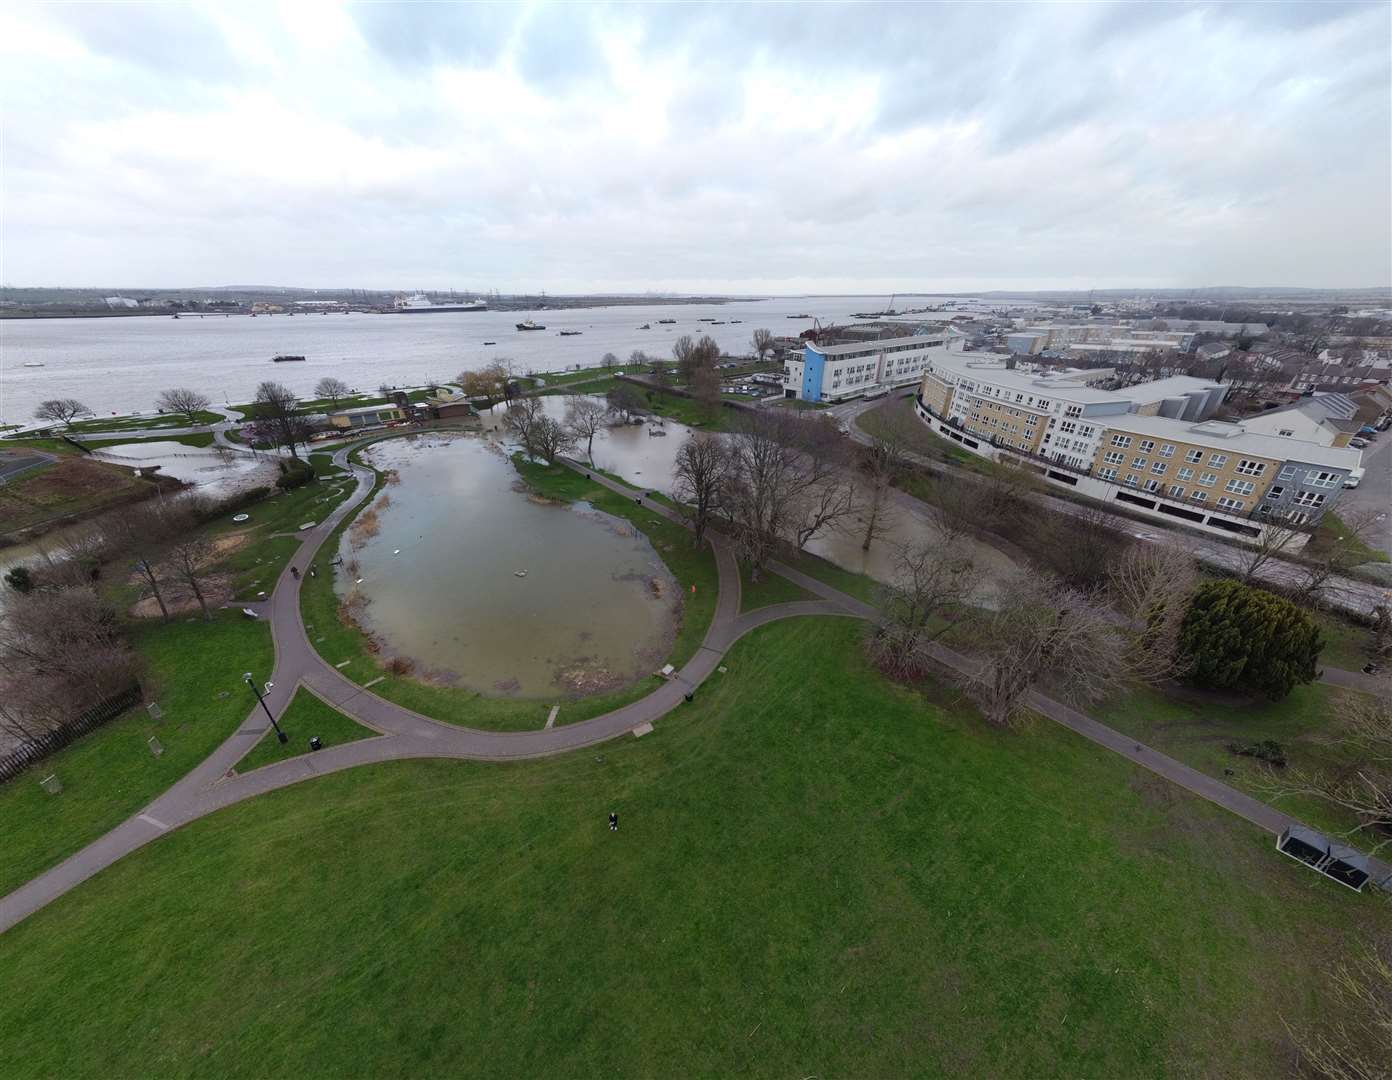 Large sections Gravesend riverside were hit by heavy flooding in February